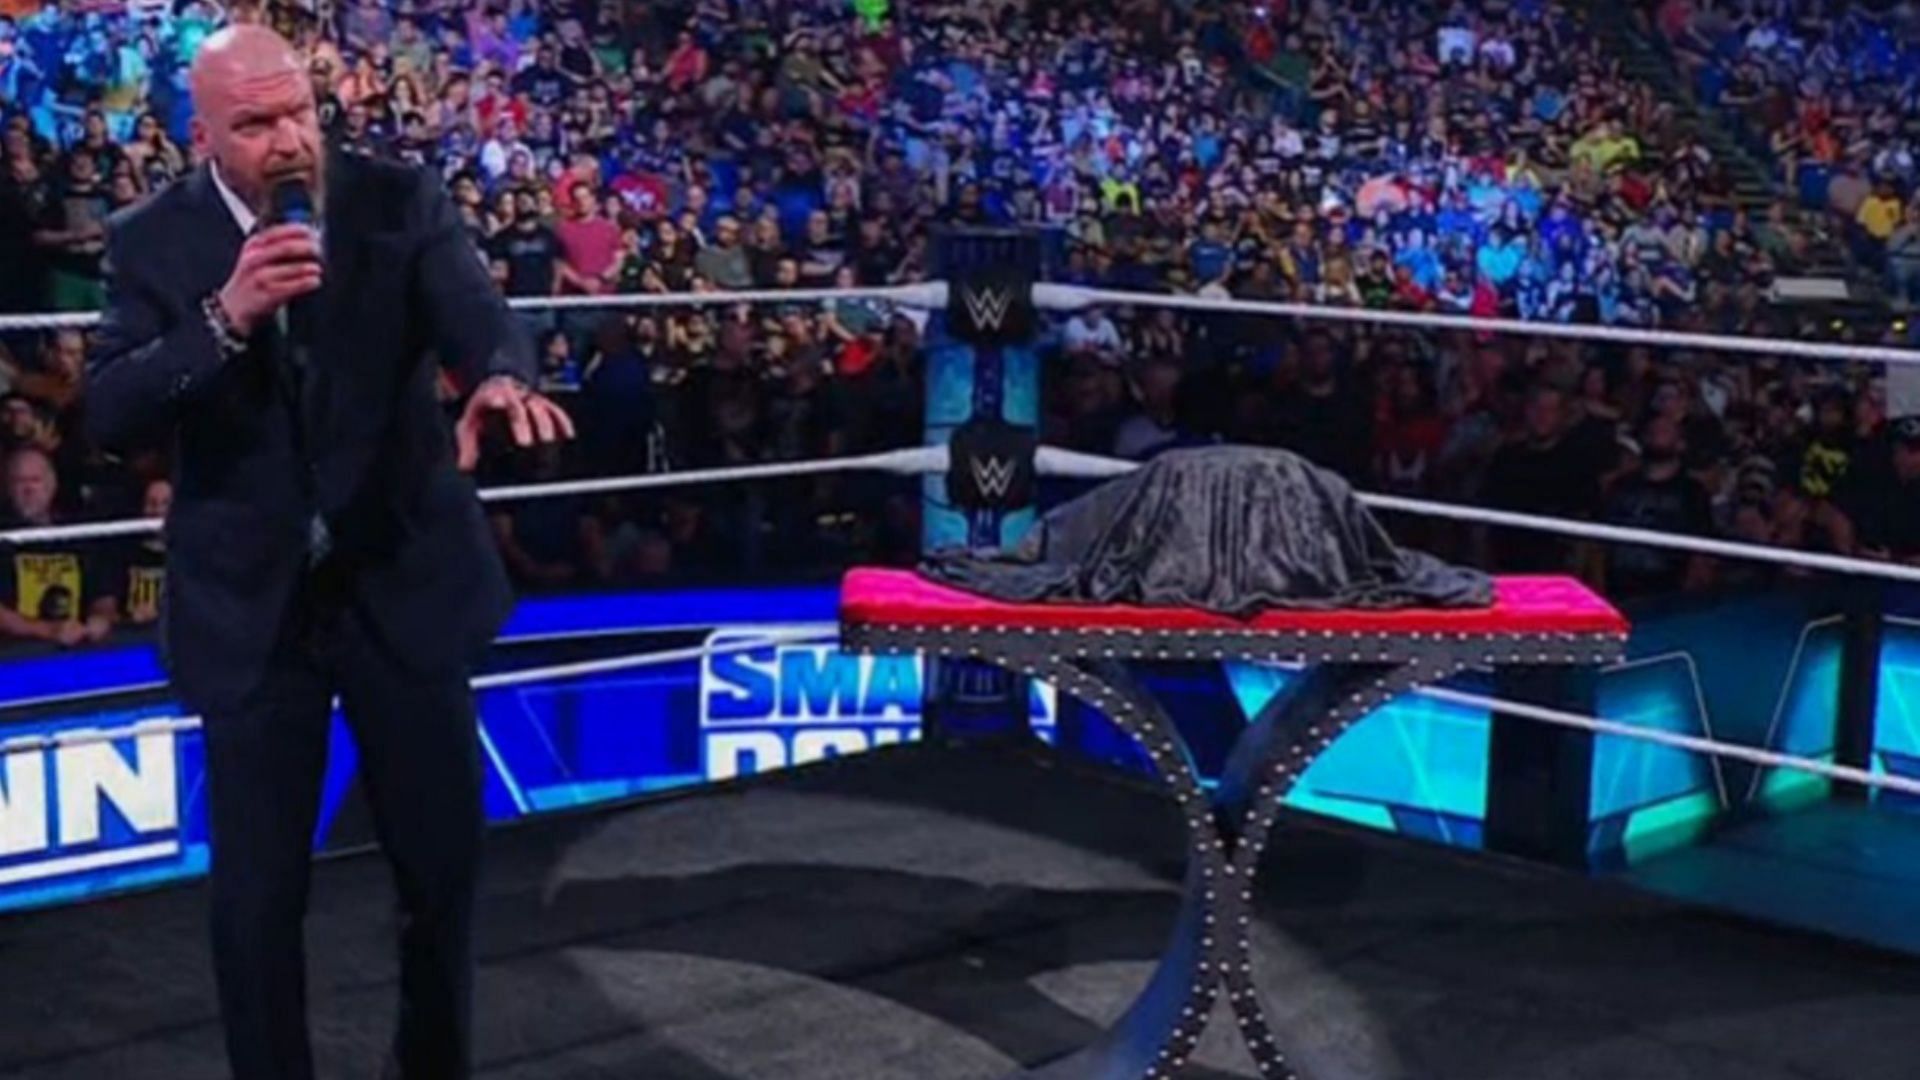 Triple H unveiled the new Undisputed WWE Universal Championship on SmackDown.